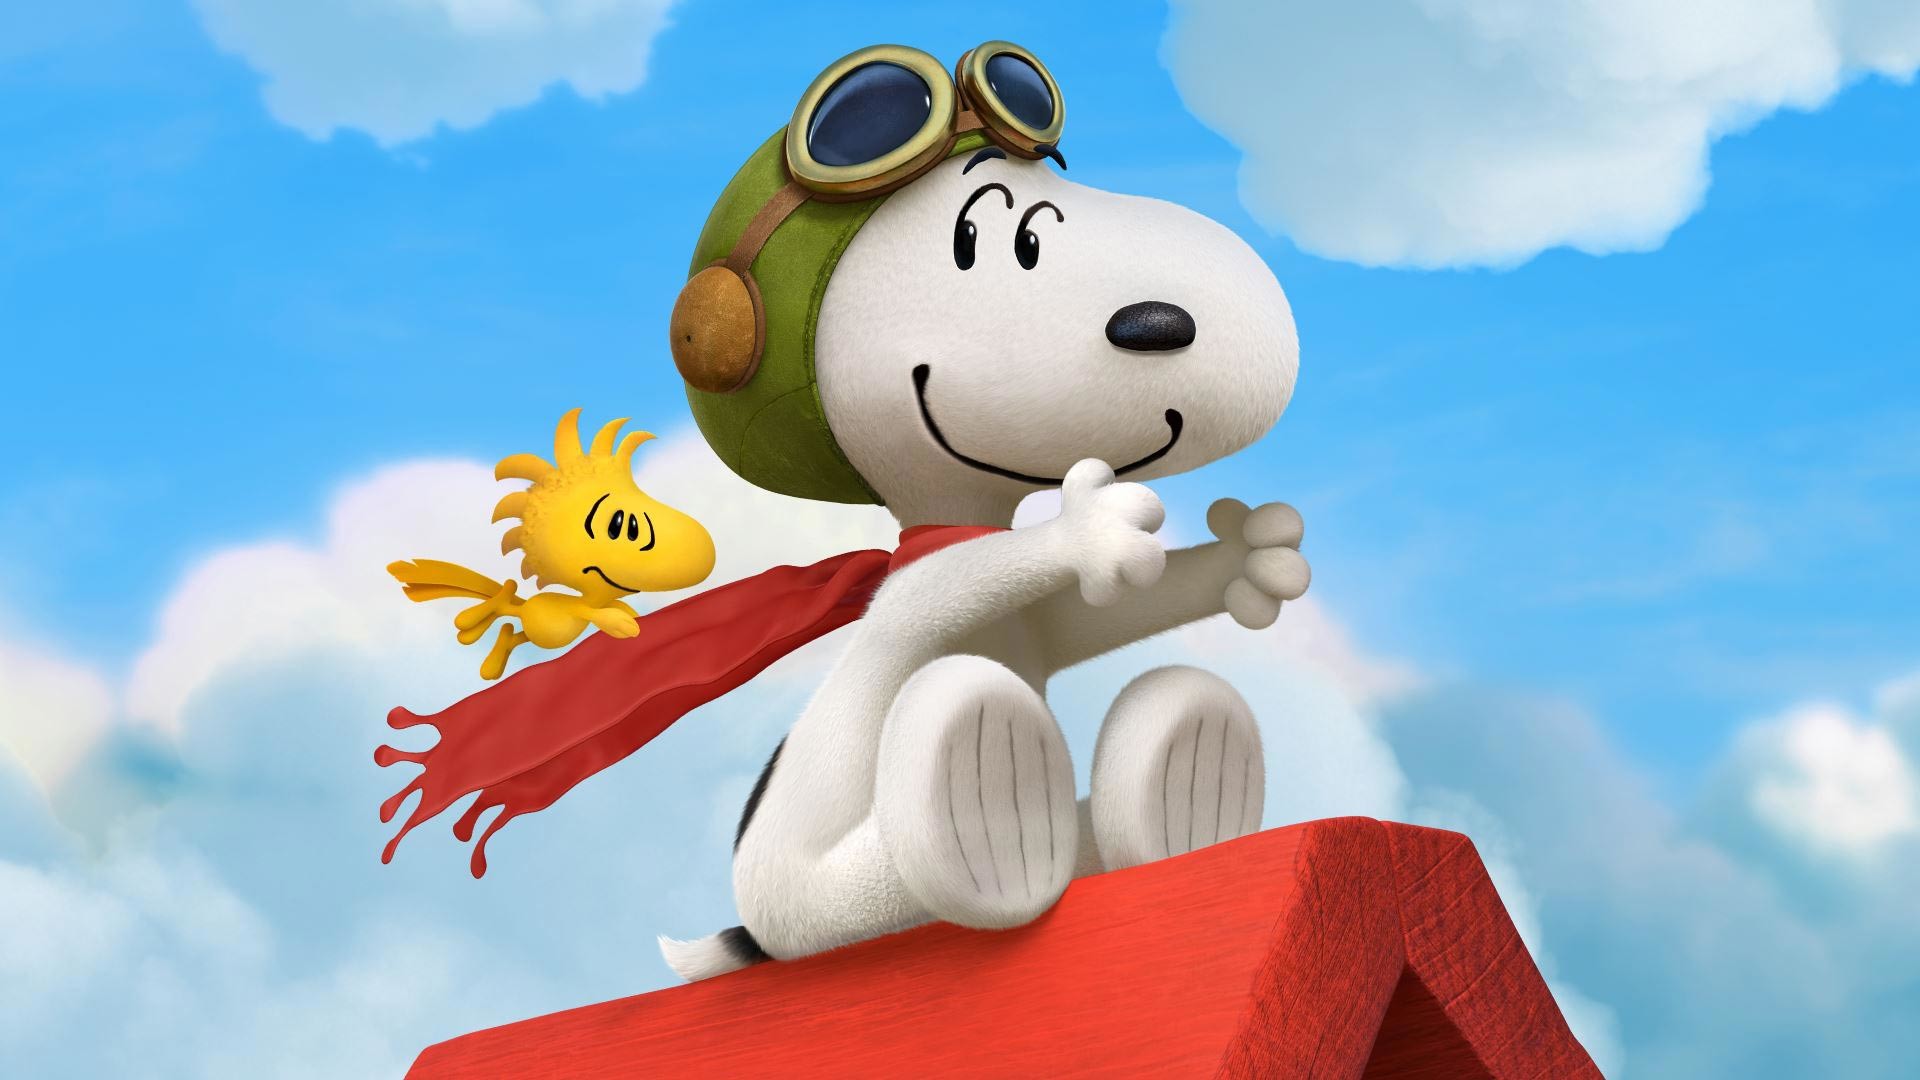 1920x1080 Great artwork released for the Peanuts movie, starring Charlie Brown and  Snoopy with their friends. Featuring characters like Woodstock, Sally, ...